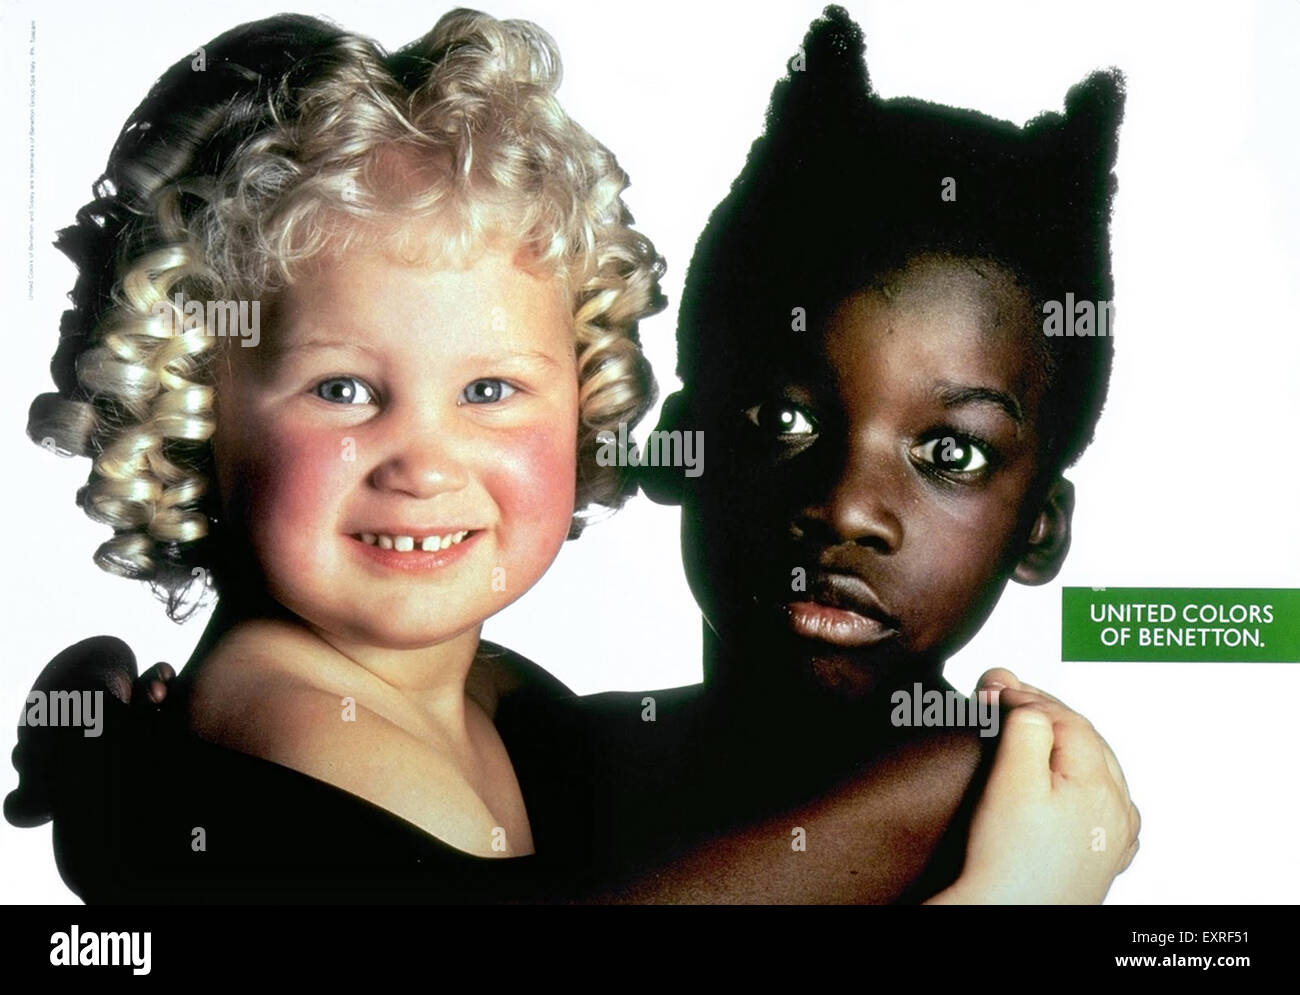 Benetton Advert High Resolution Stock Photography and Images - Alamy